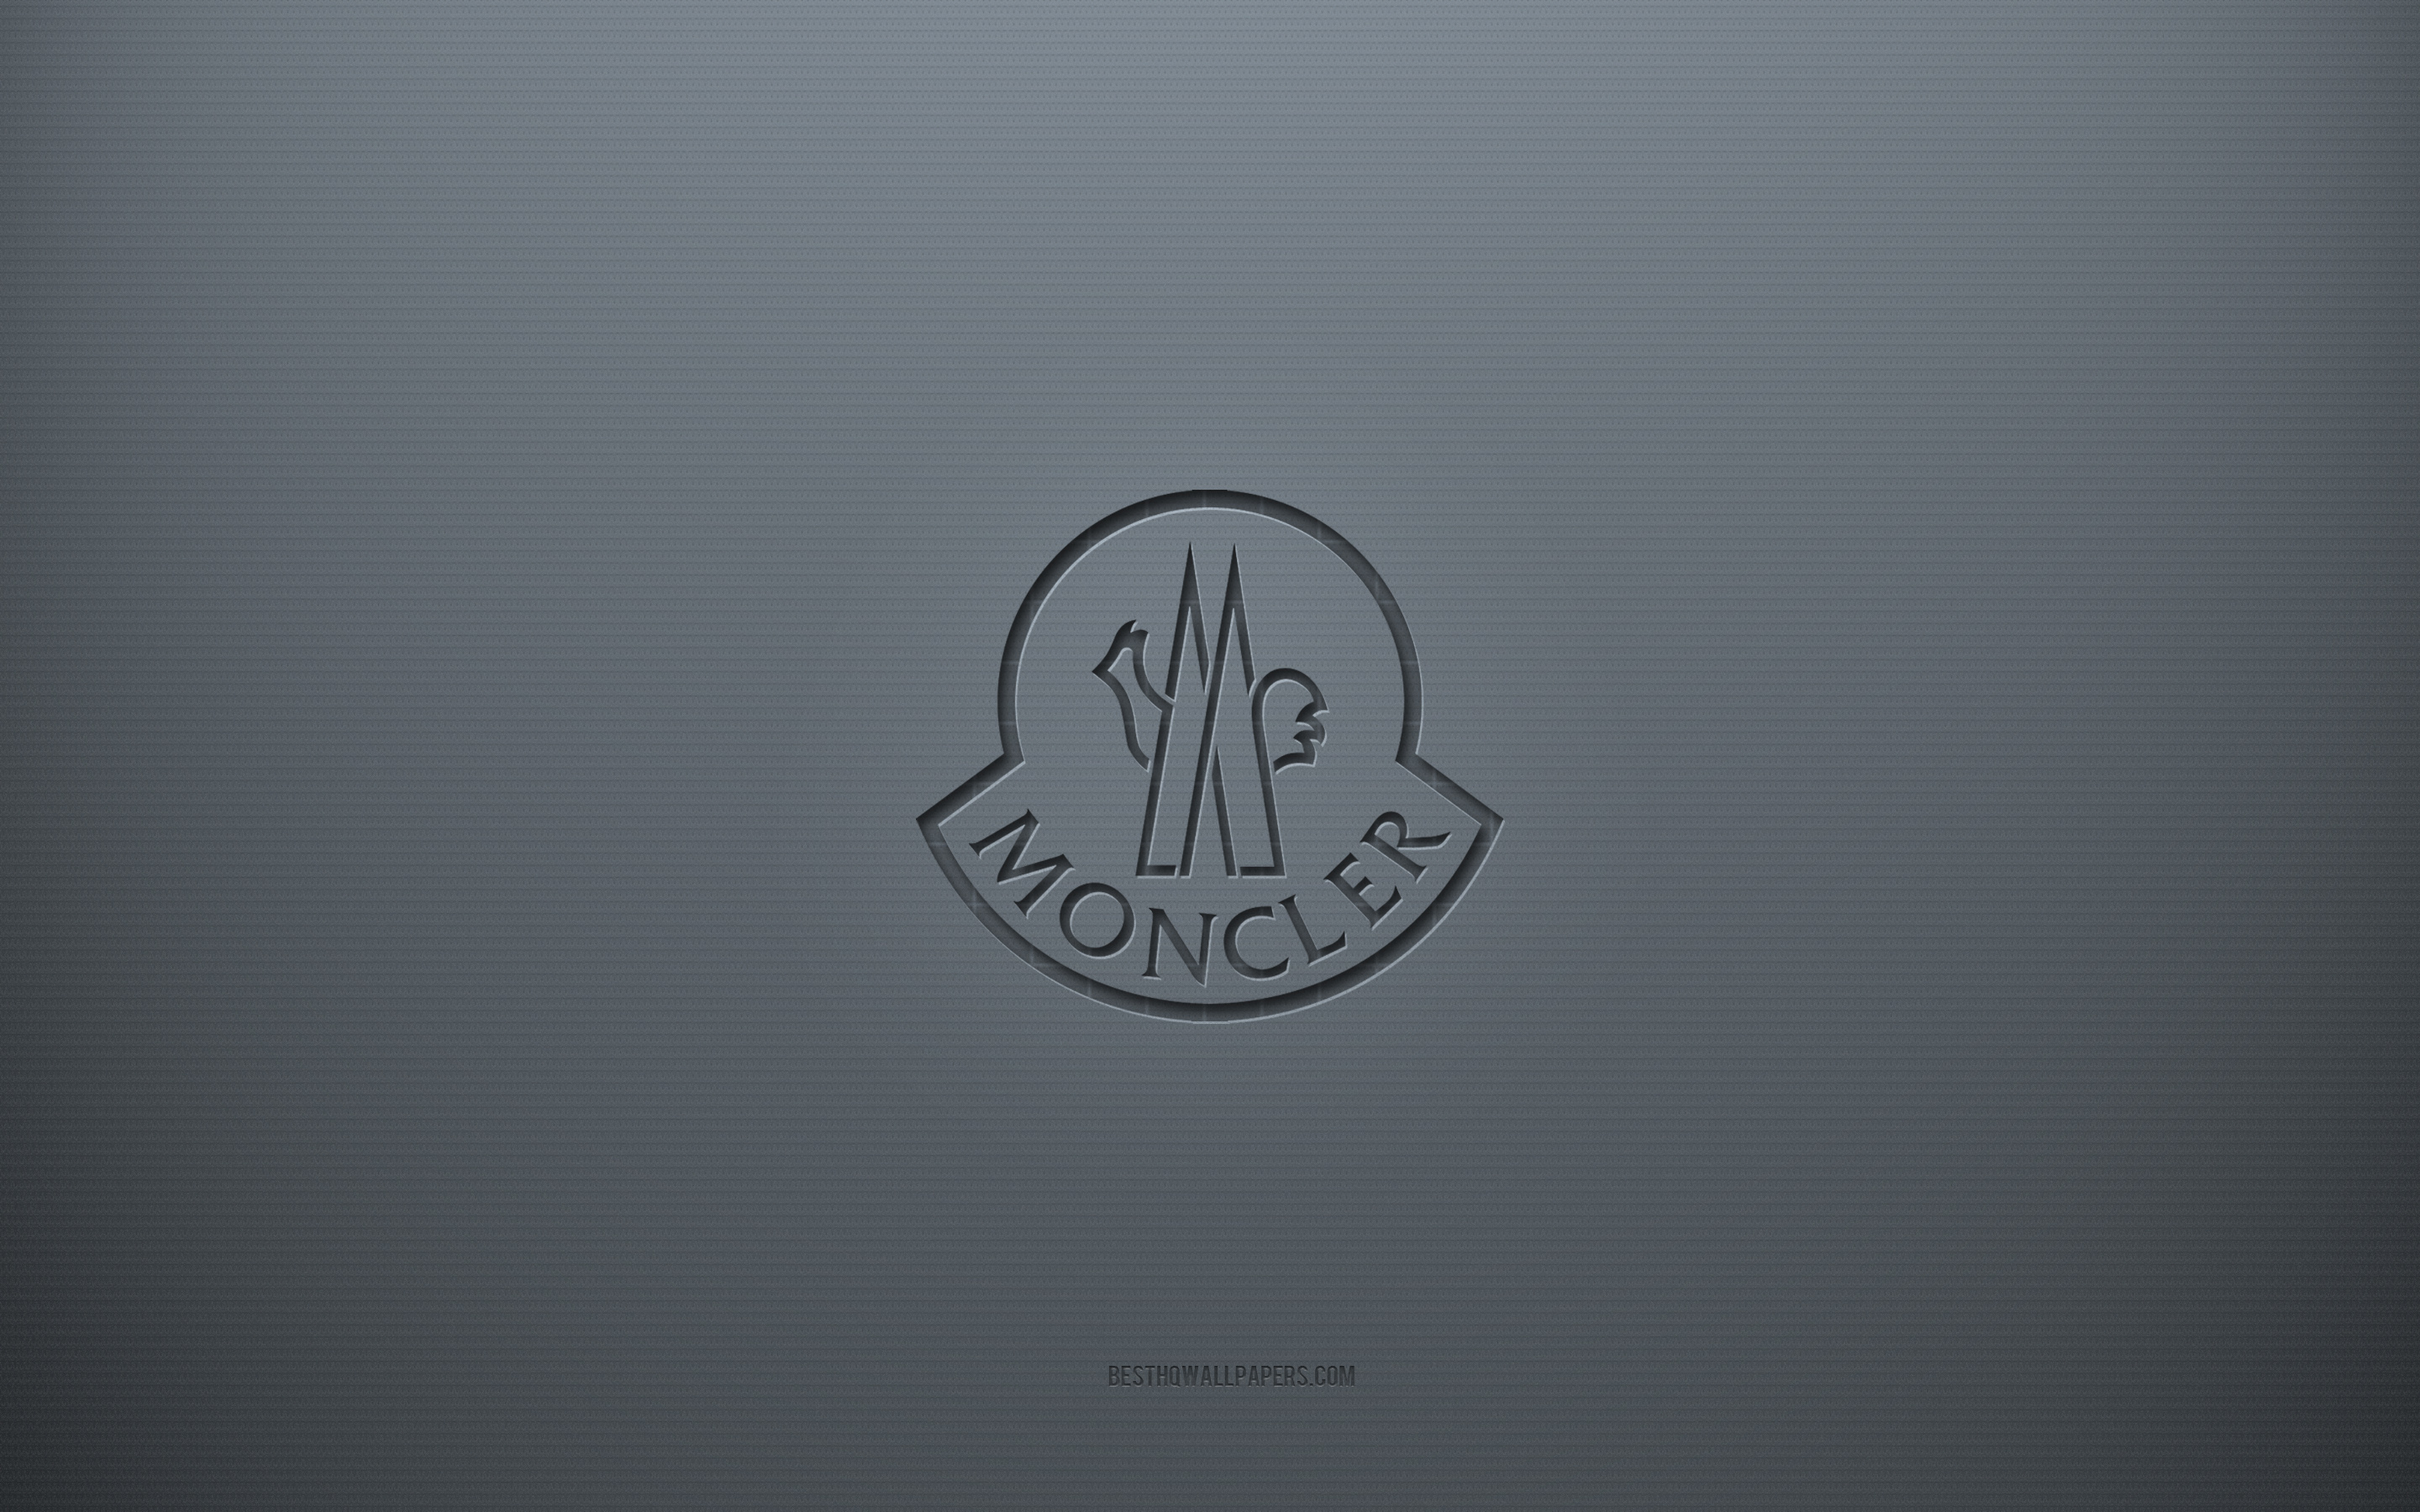 Download wallpapers Moncler logo, gray creative background, Moncler ...